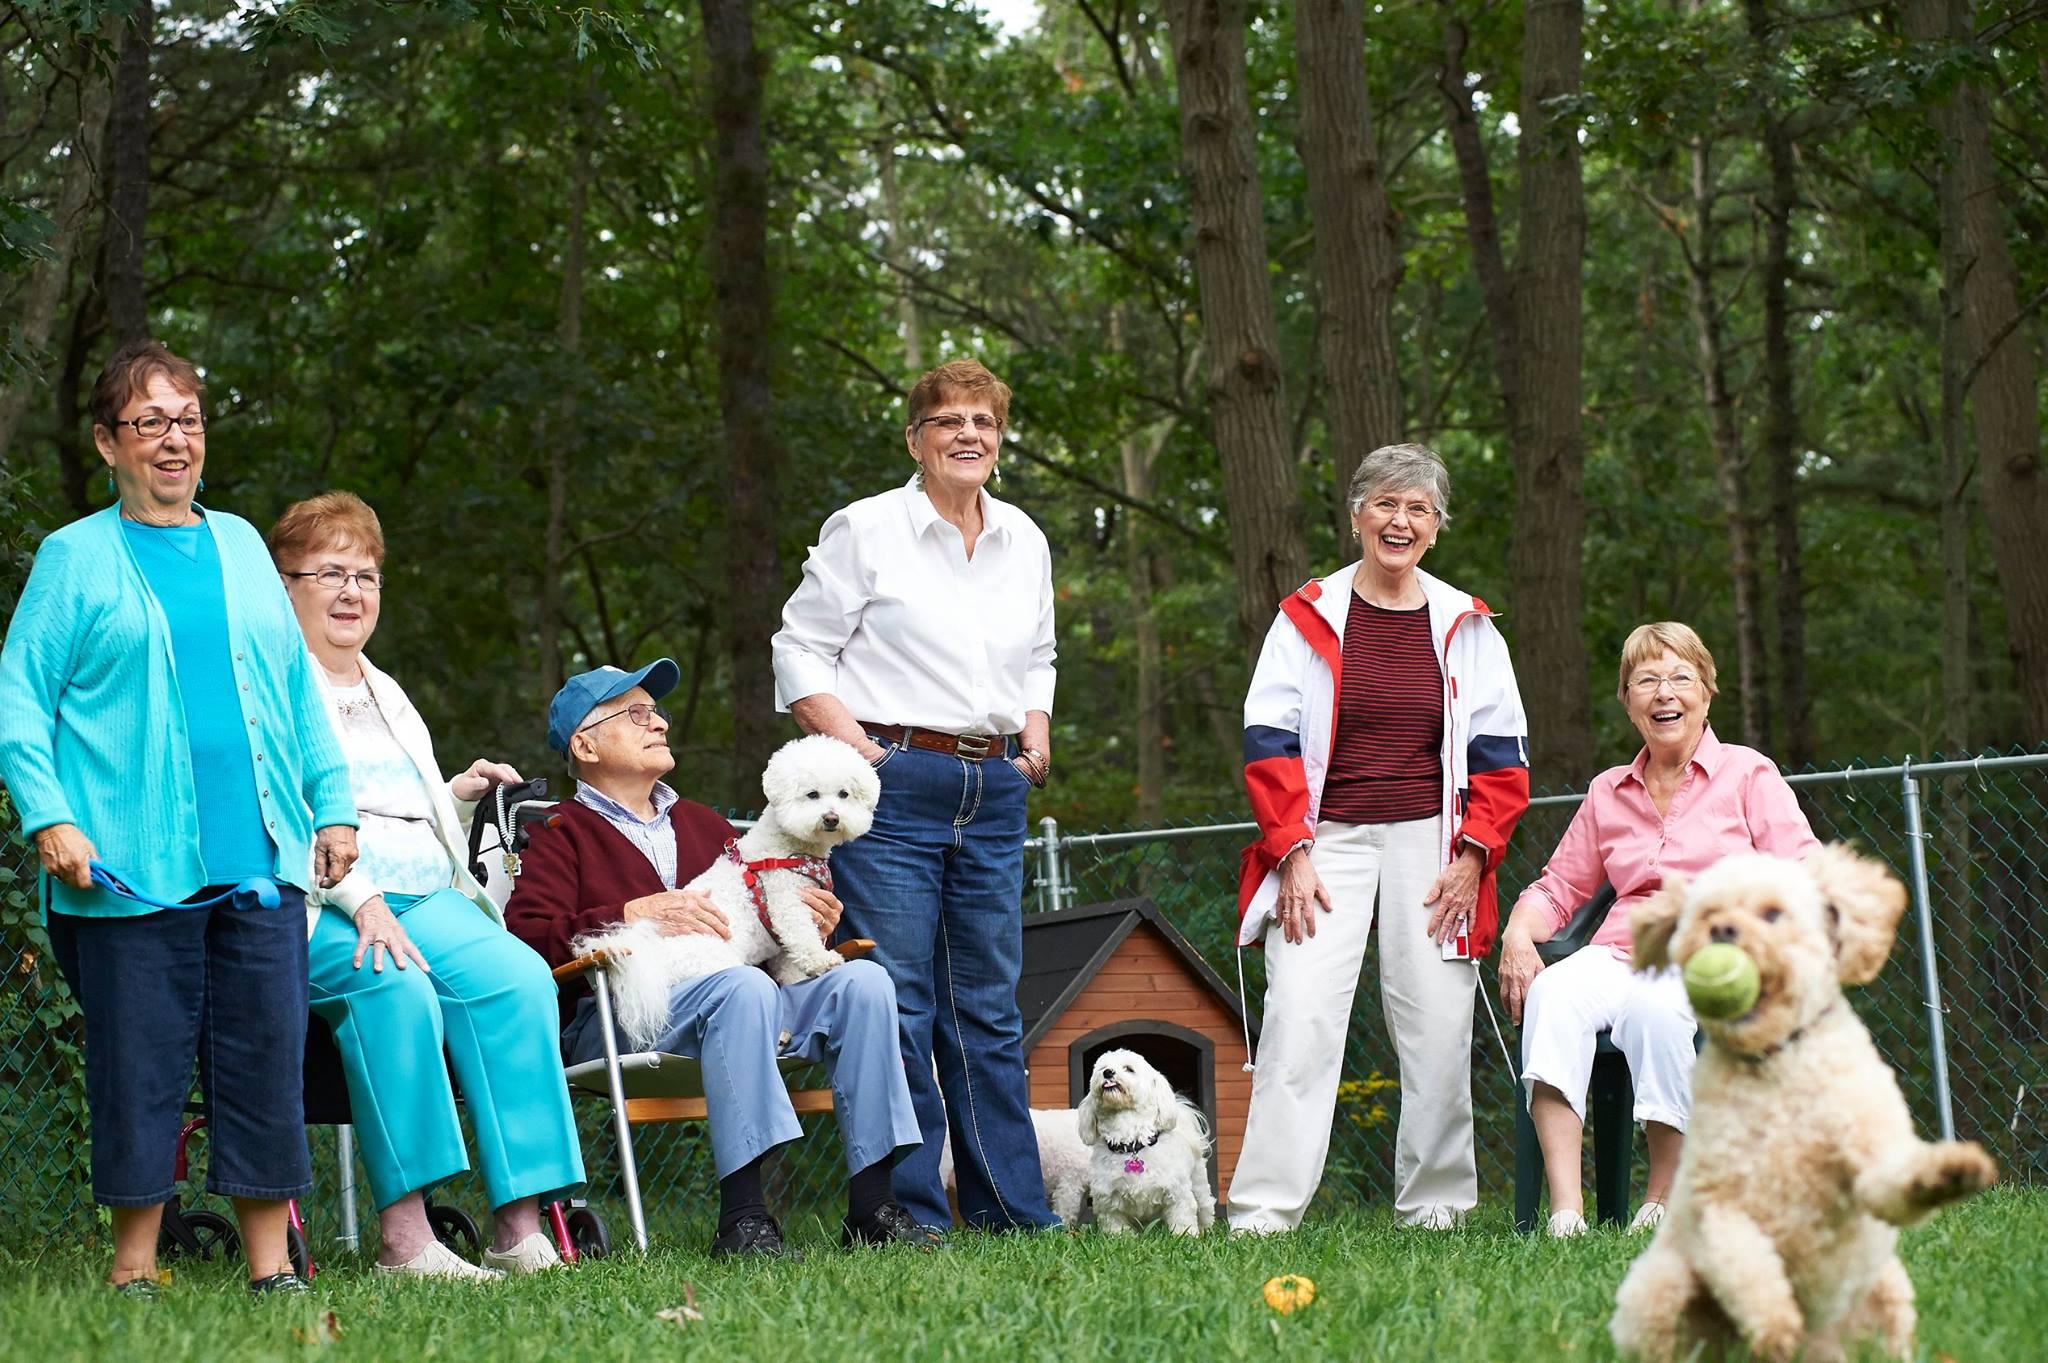 Dogs spread joy at this assisted living facility.